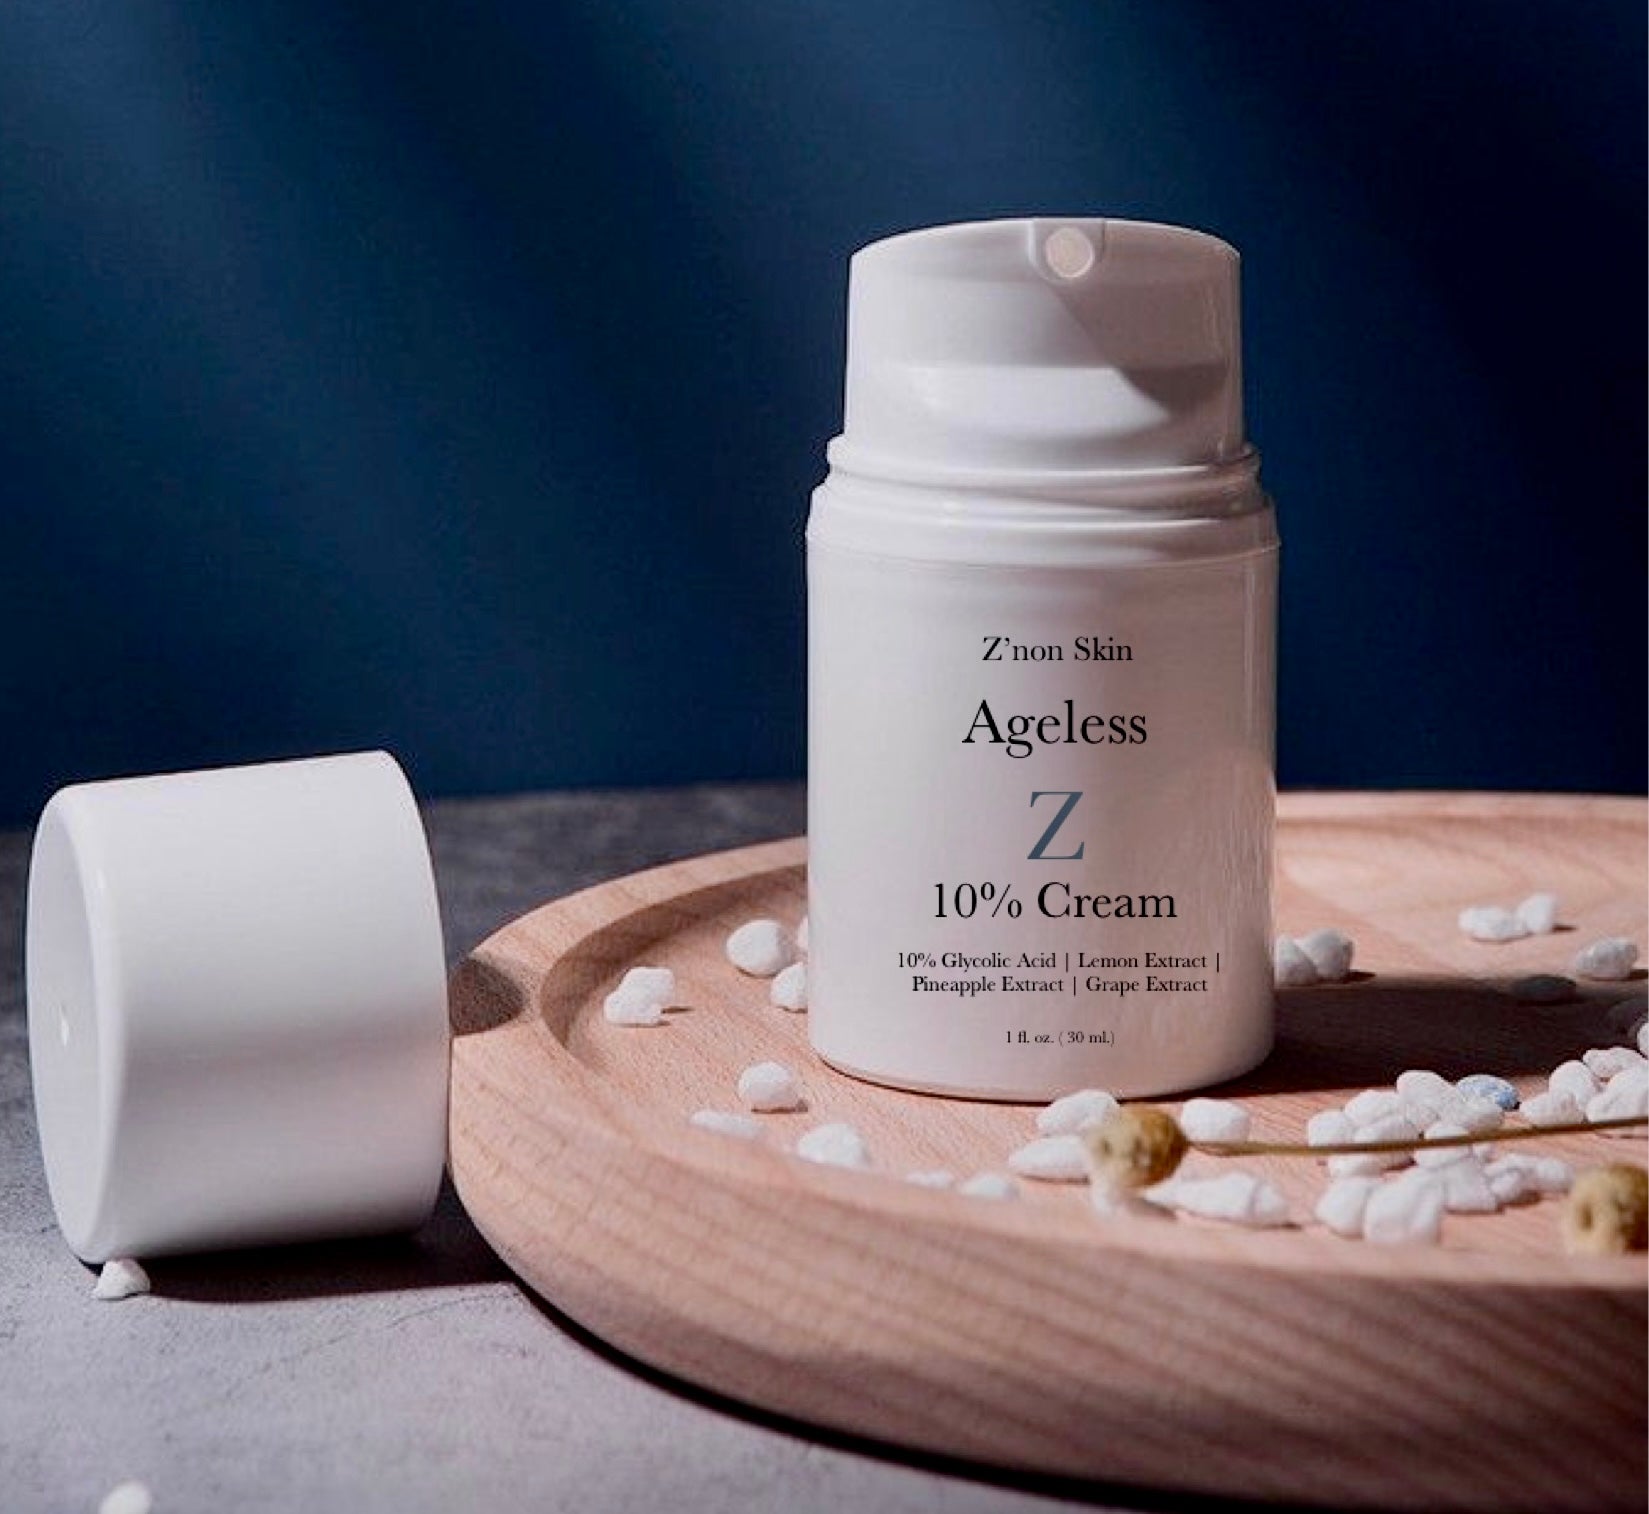 Ageless 10% Anti-Aging/Lightening Cream( 2 oz.) Comes with 12% gel to apply on top